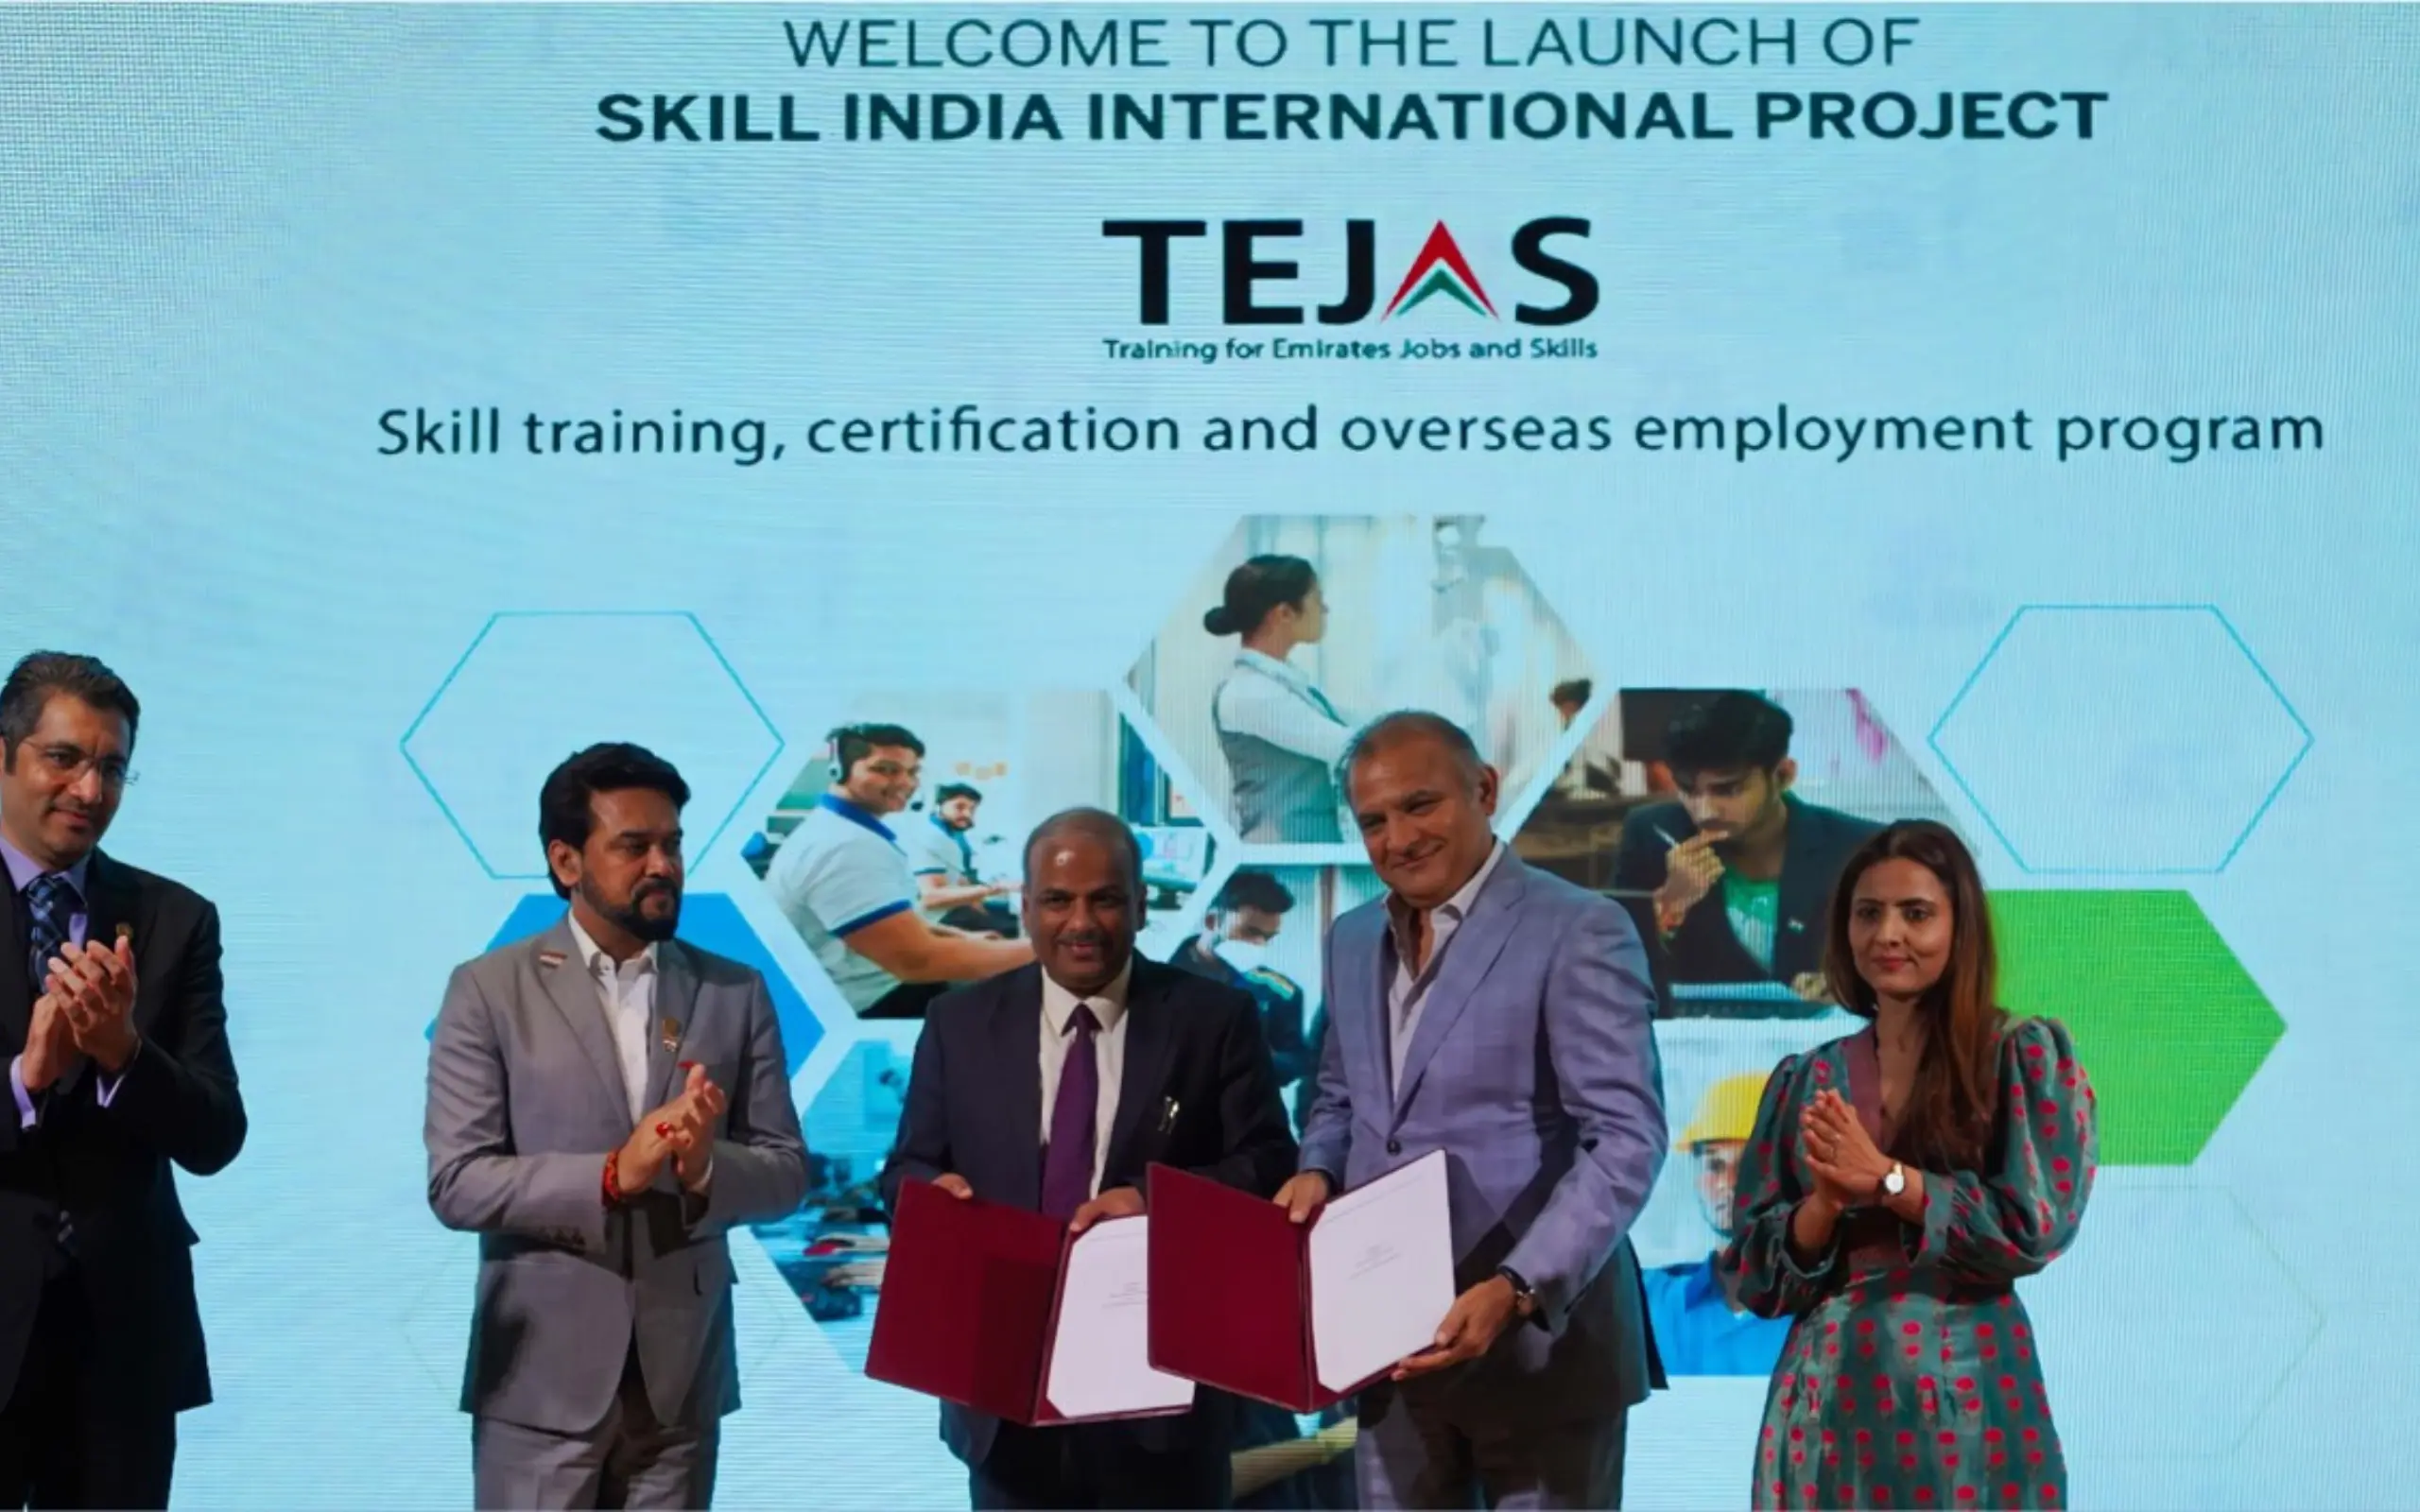 EFS-group-partners-with-the-National-Skill-Development-Corporation-(NSDC)-of-India-towards-the-launch-of-Tejas